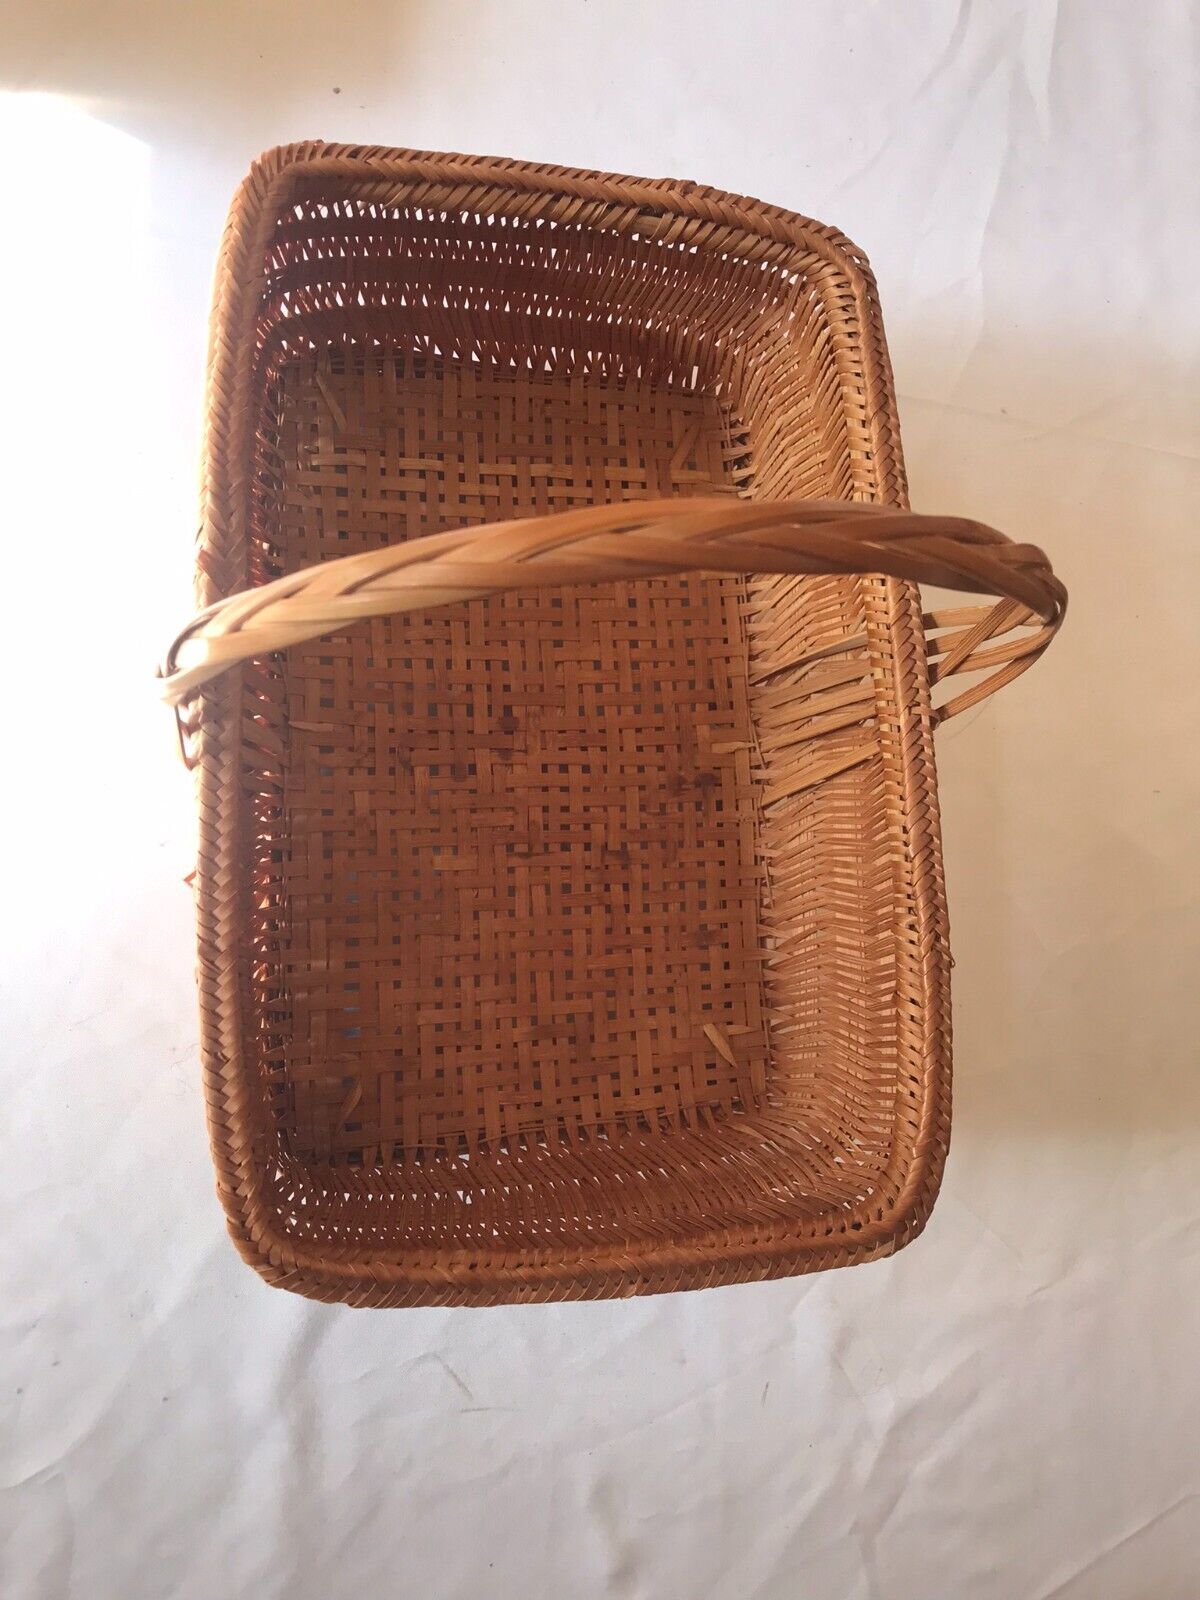 Vintage Woven Bamboo Rattan Basket Tray Box w/ Handle for Fruit Flower Vegetable